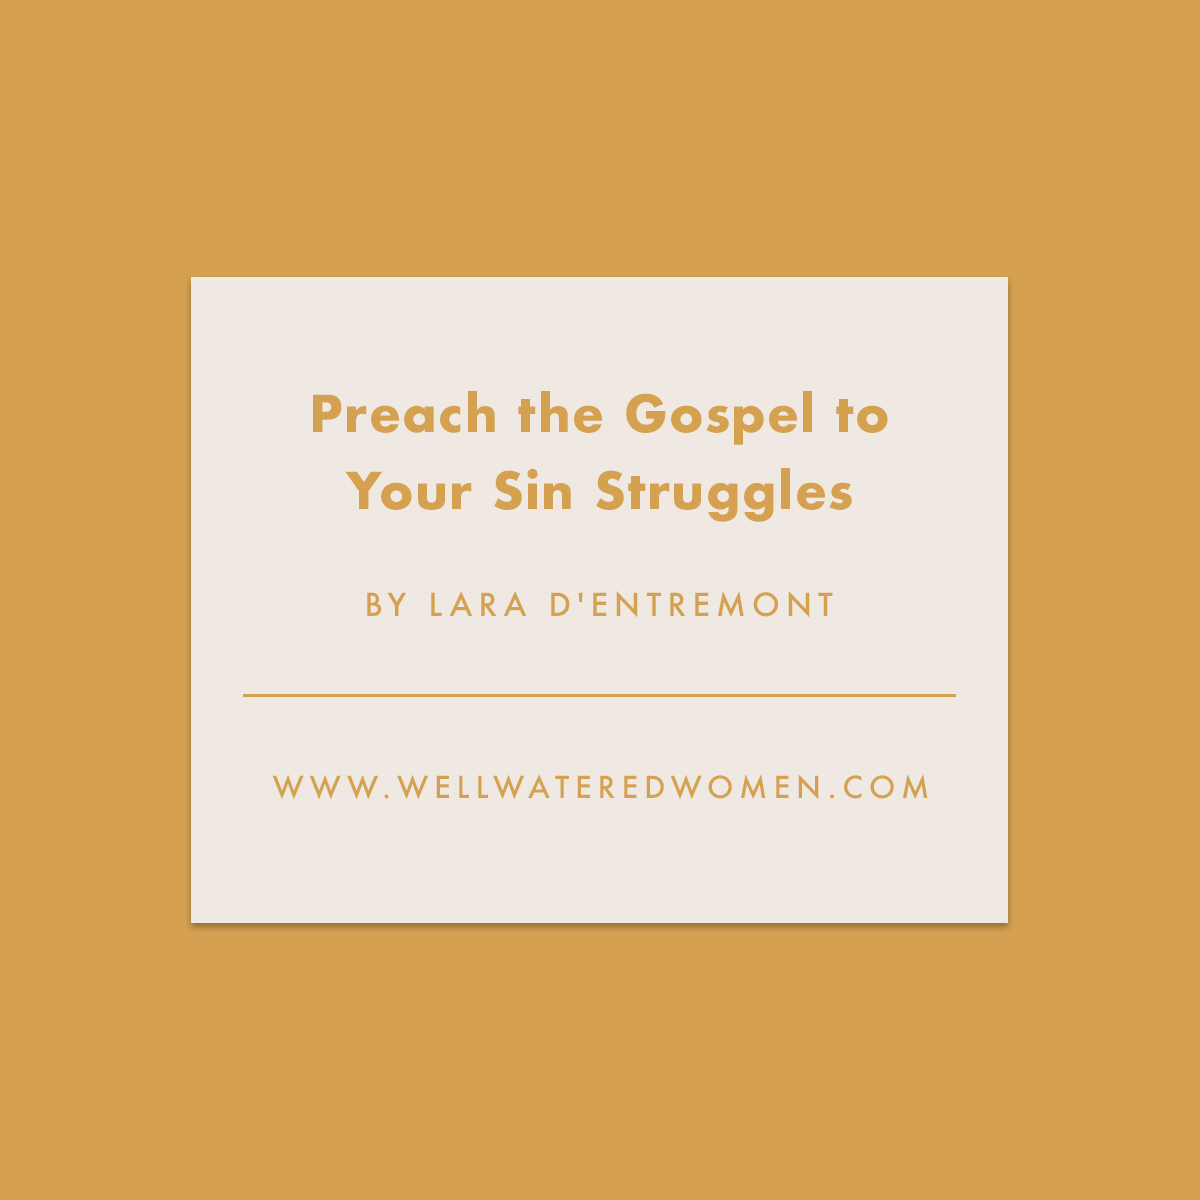 Preach the Gospel to Your Sin Struggles - an Article from Well-Watered Women